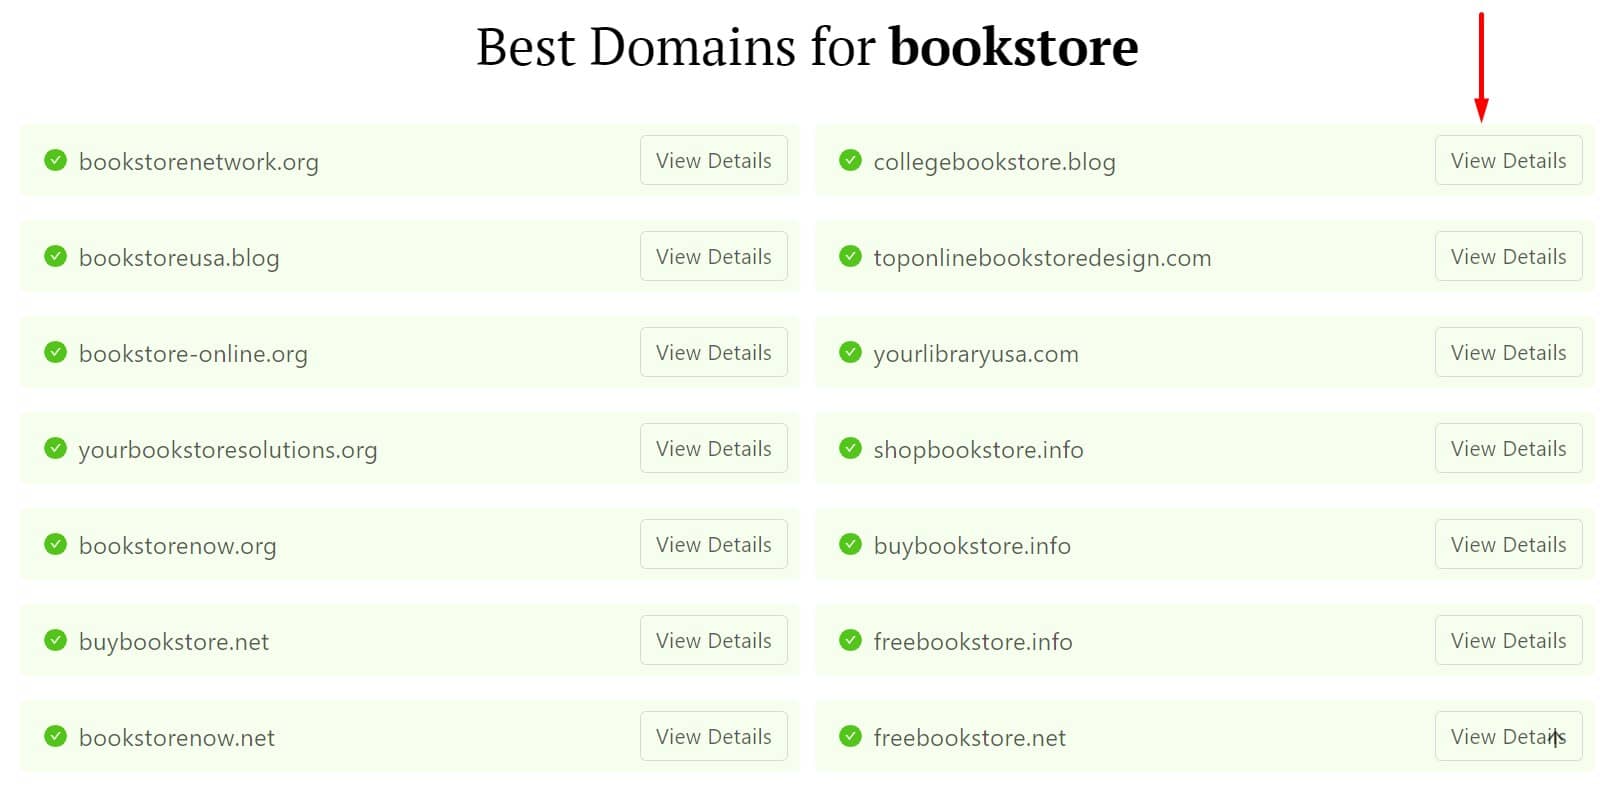 DomainWheel bookstore name generator with a red arrow pointing to the "View Details" button for the top right result